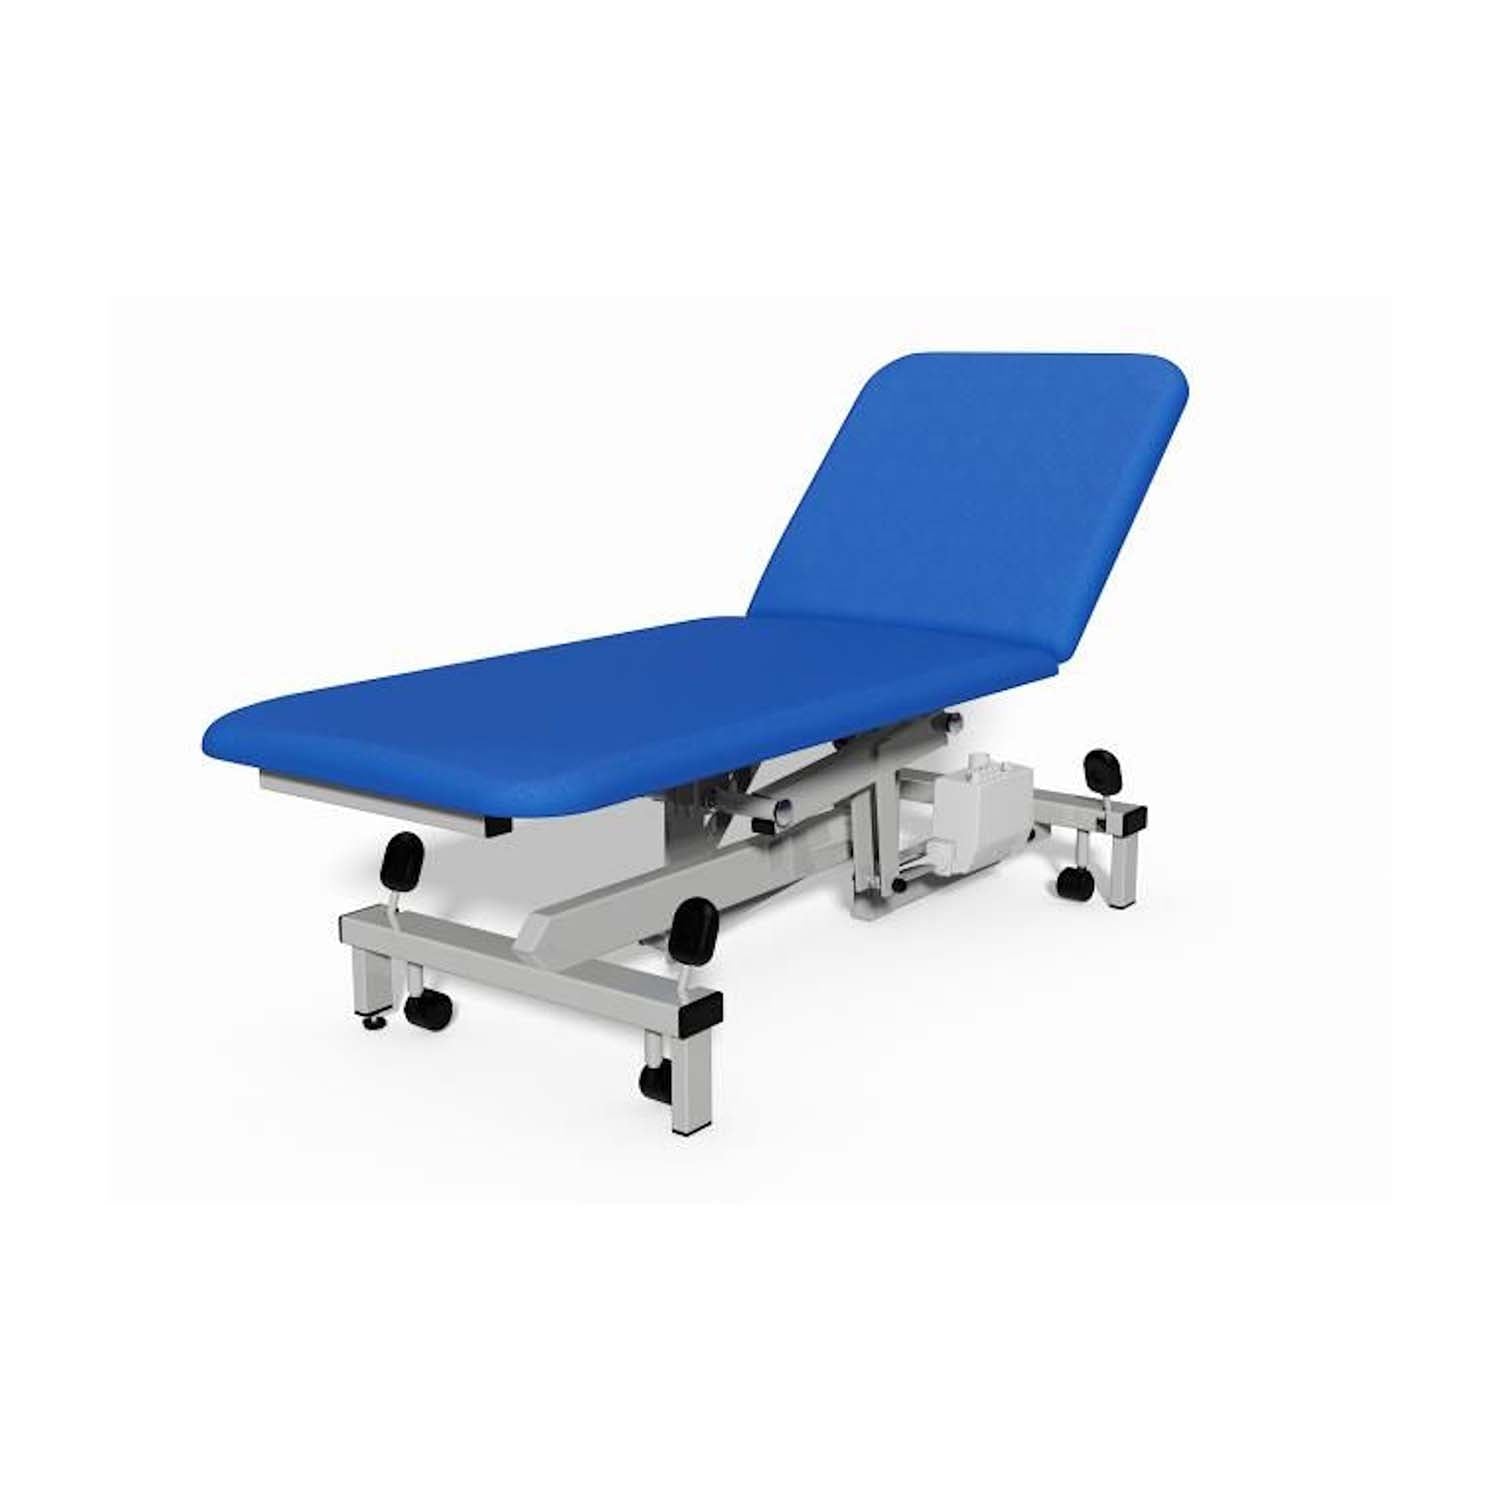 Plinth 2000 Model 502 Examination Couch | Electric | Atlantic Blue